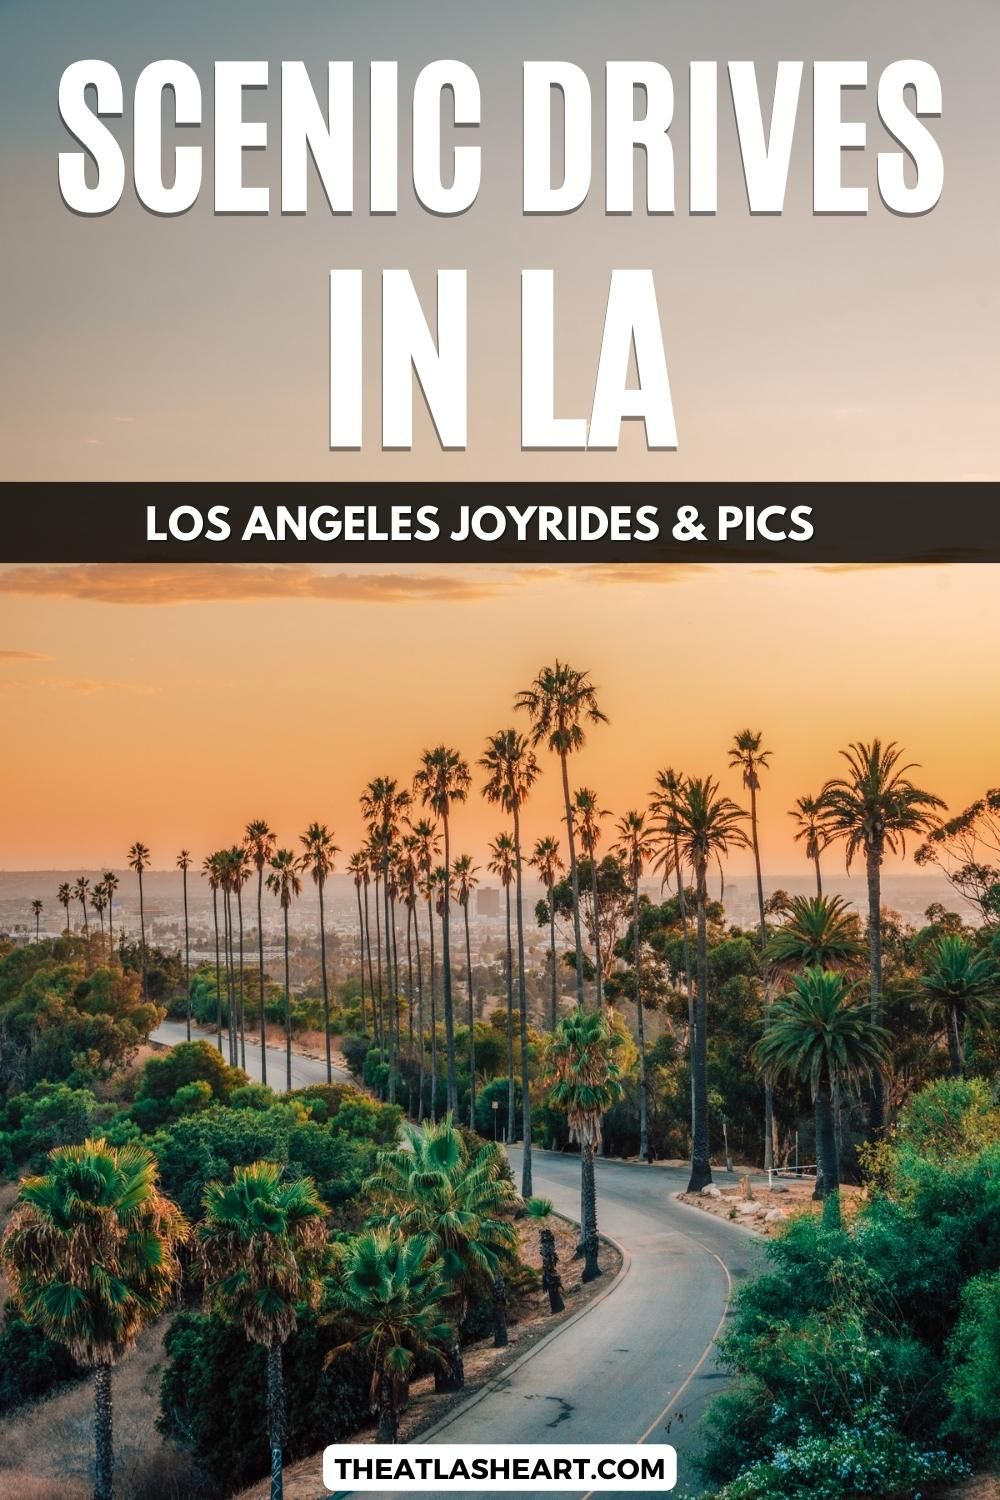 Scenic Drives in LA Pin
Pinterest pin a palm tree-lined street with an orange sunset and the text overlay, "Scenic Drives in LA: Los Angeles Joyrides & Pics."